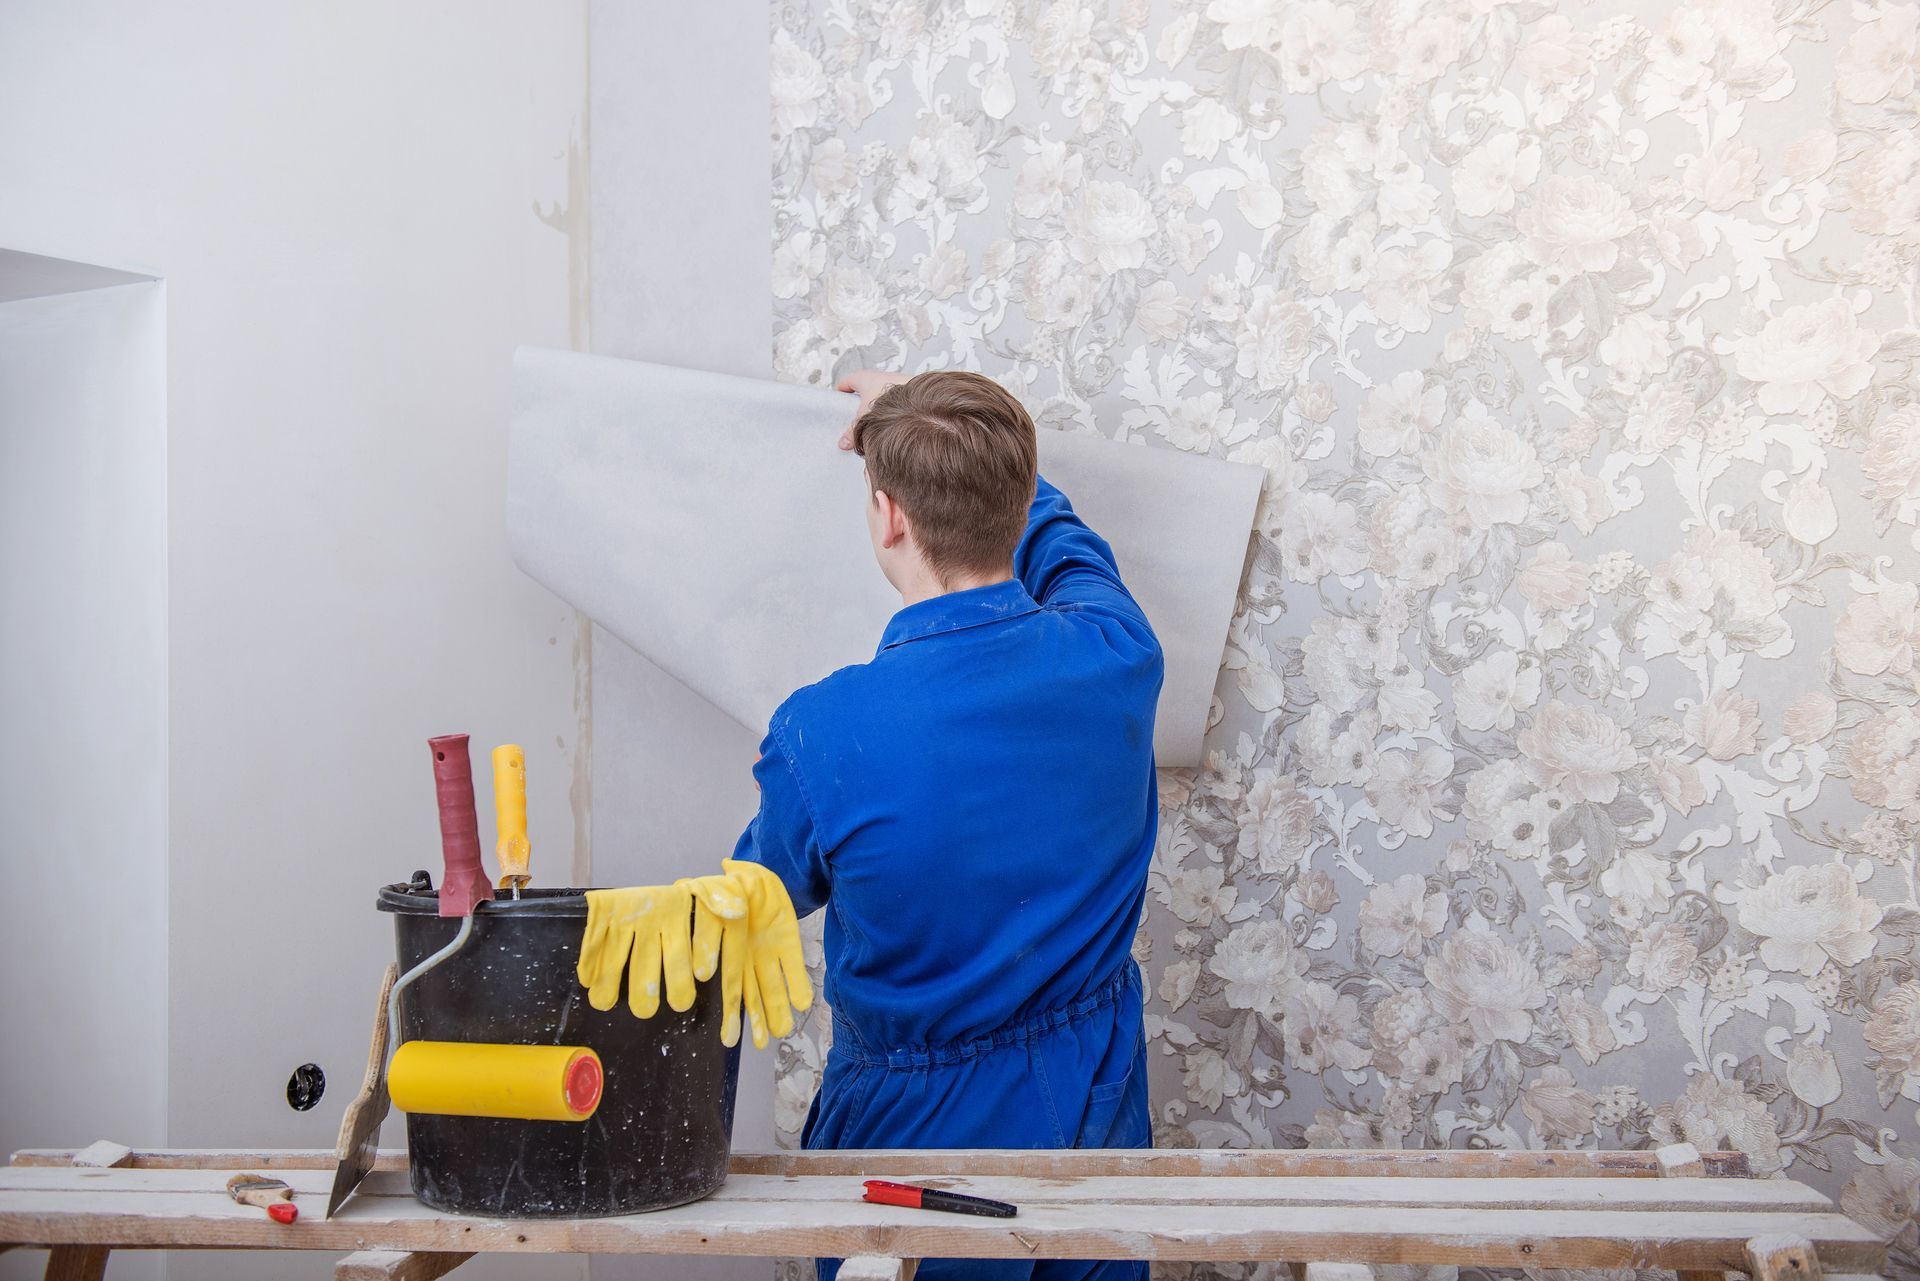 A young worker carefully wallpapering a wall in a room.